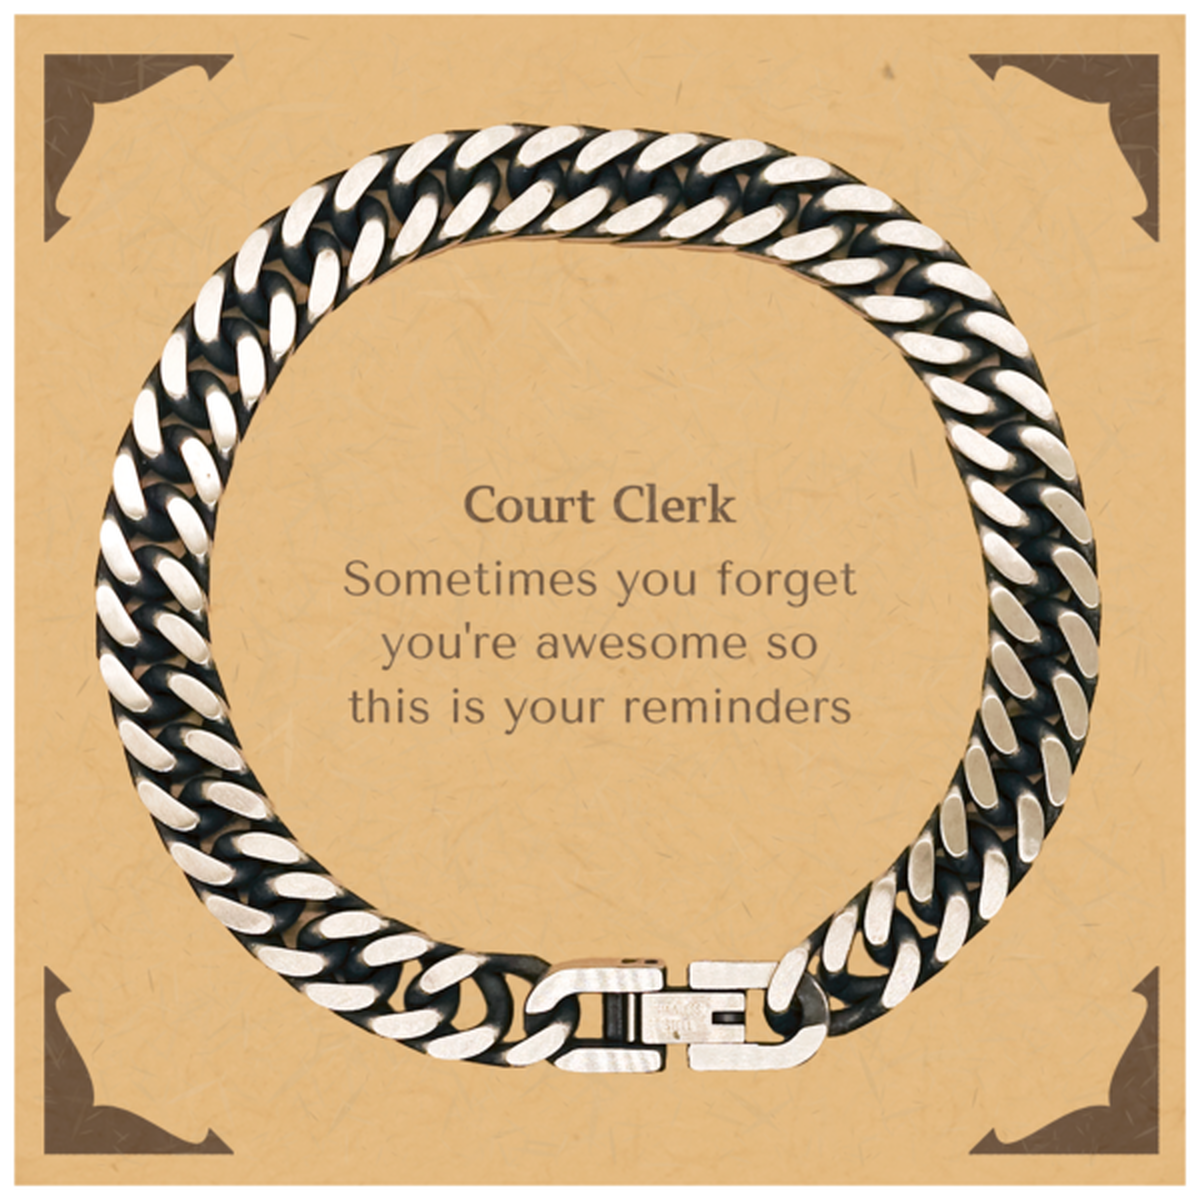 Sentimental Court Clerk Cuban Link Chain Bracelet, Court Clerk Sometimes you forget you're awesome so this is your reminders, Graduation Christmas Birthday Gifts for Court Clerk, Men, Women, Coworkers